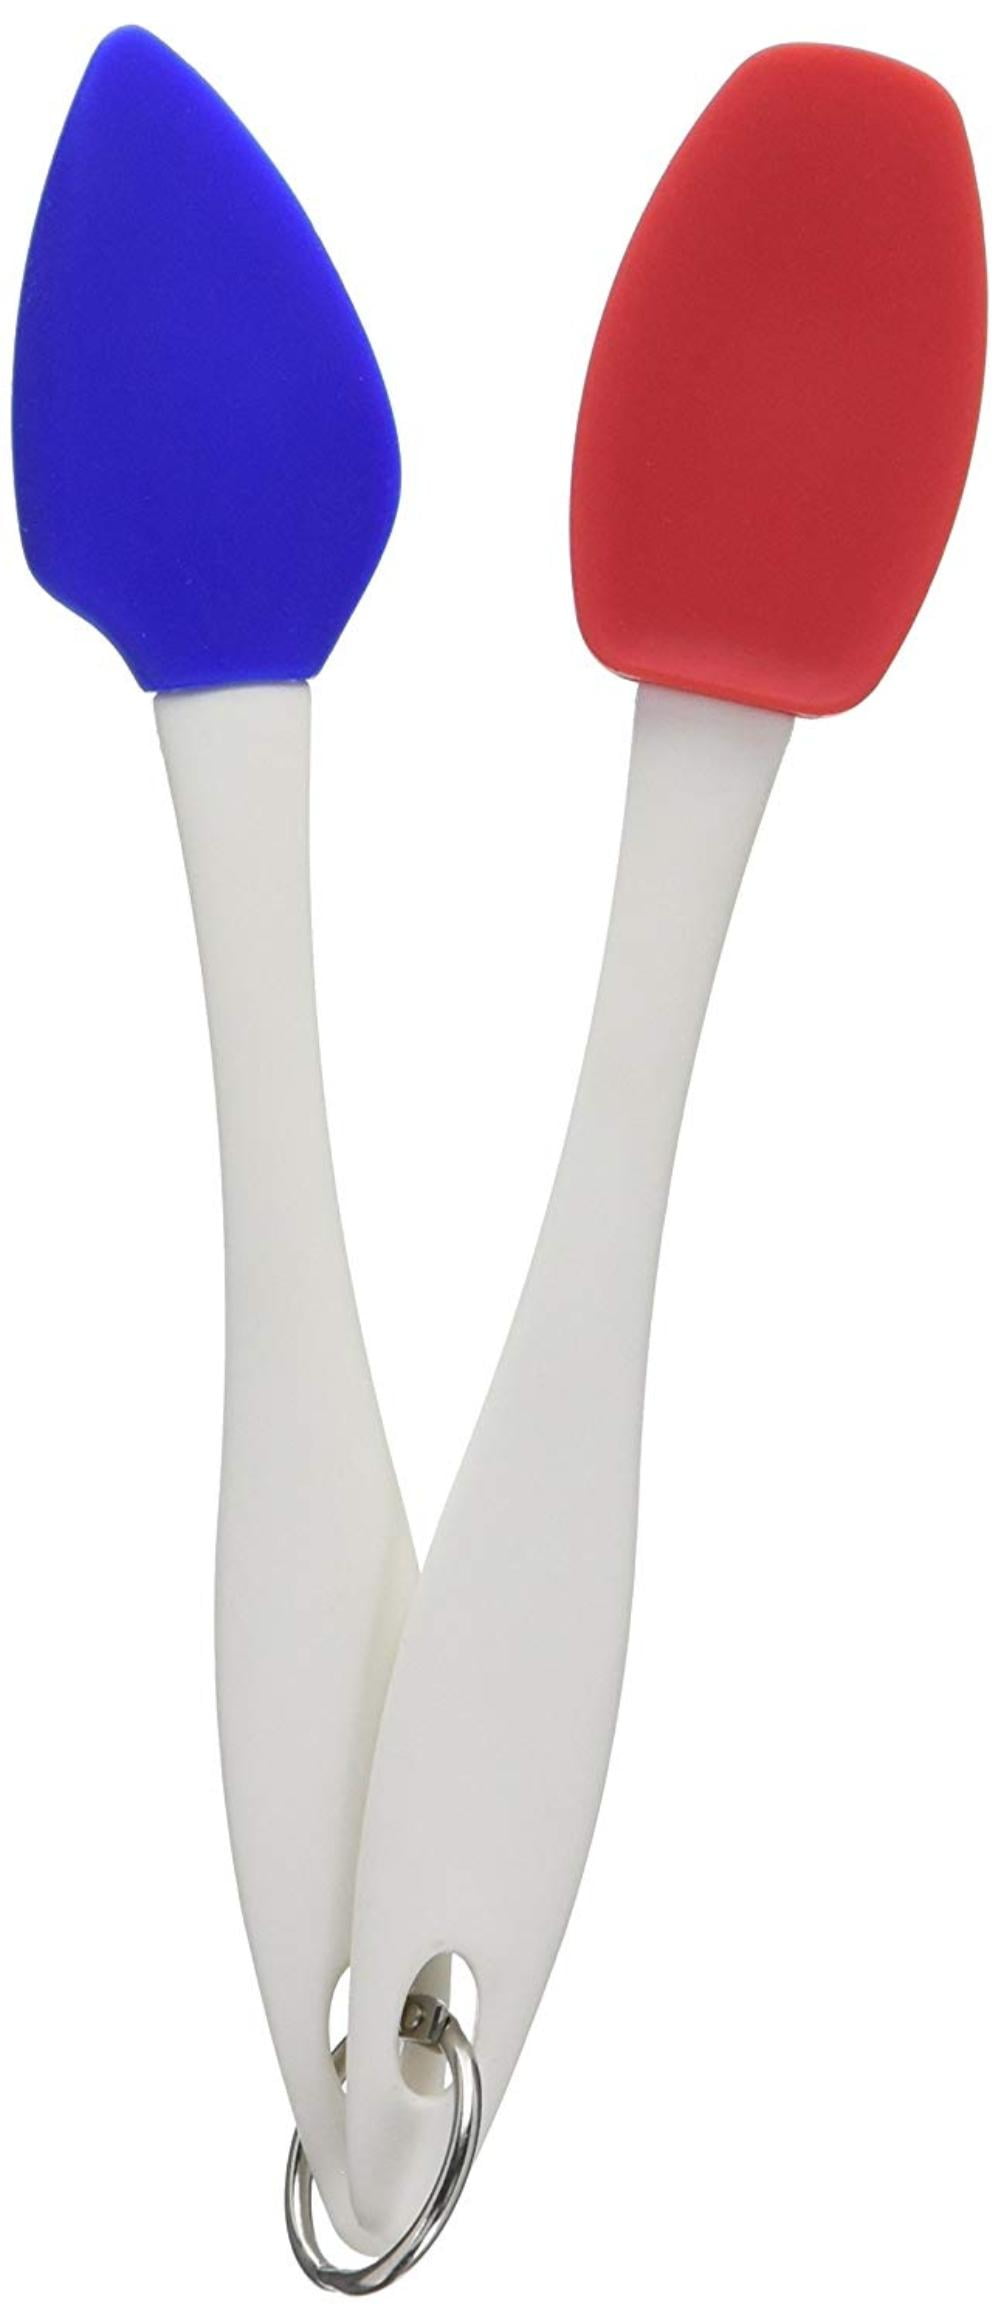 Dinner 4 Two Mini Spatula or Spreader Set Of 2 Silicone 7” Long